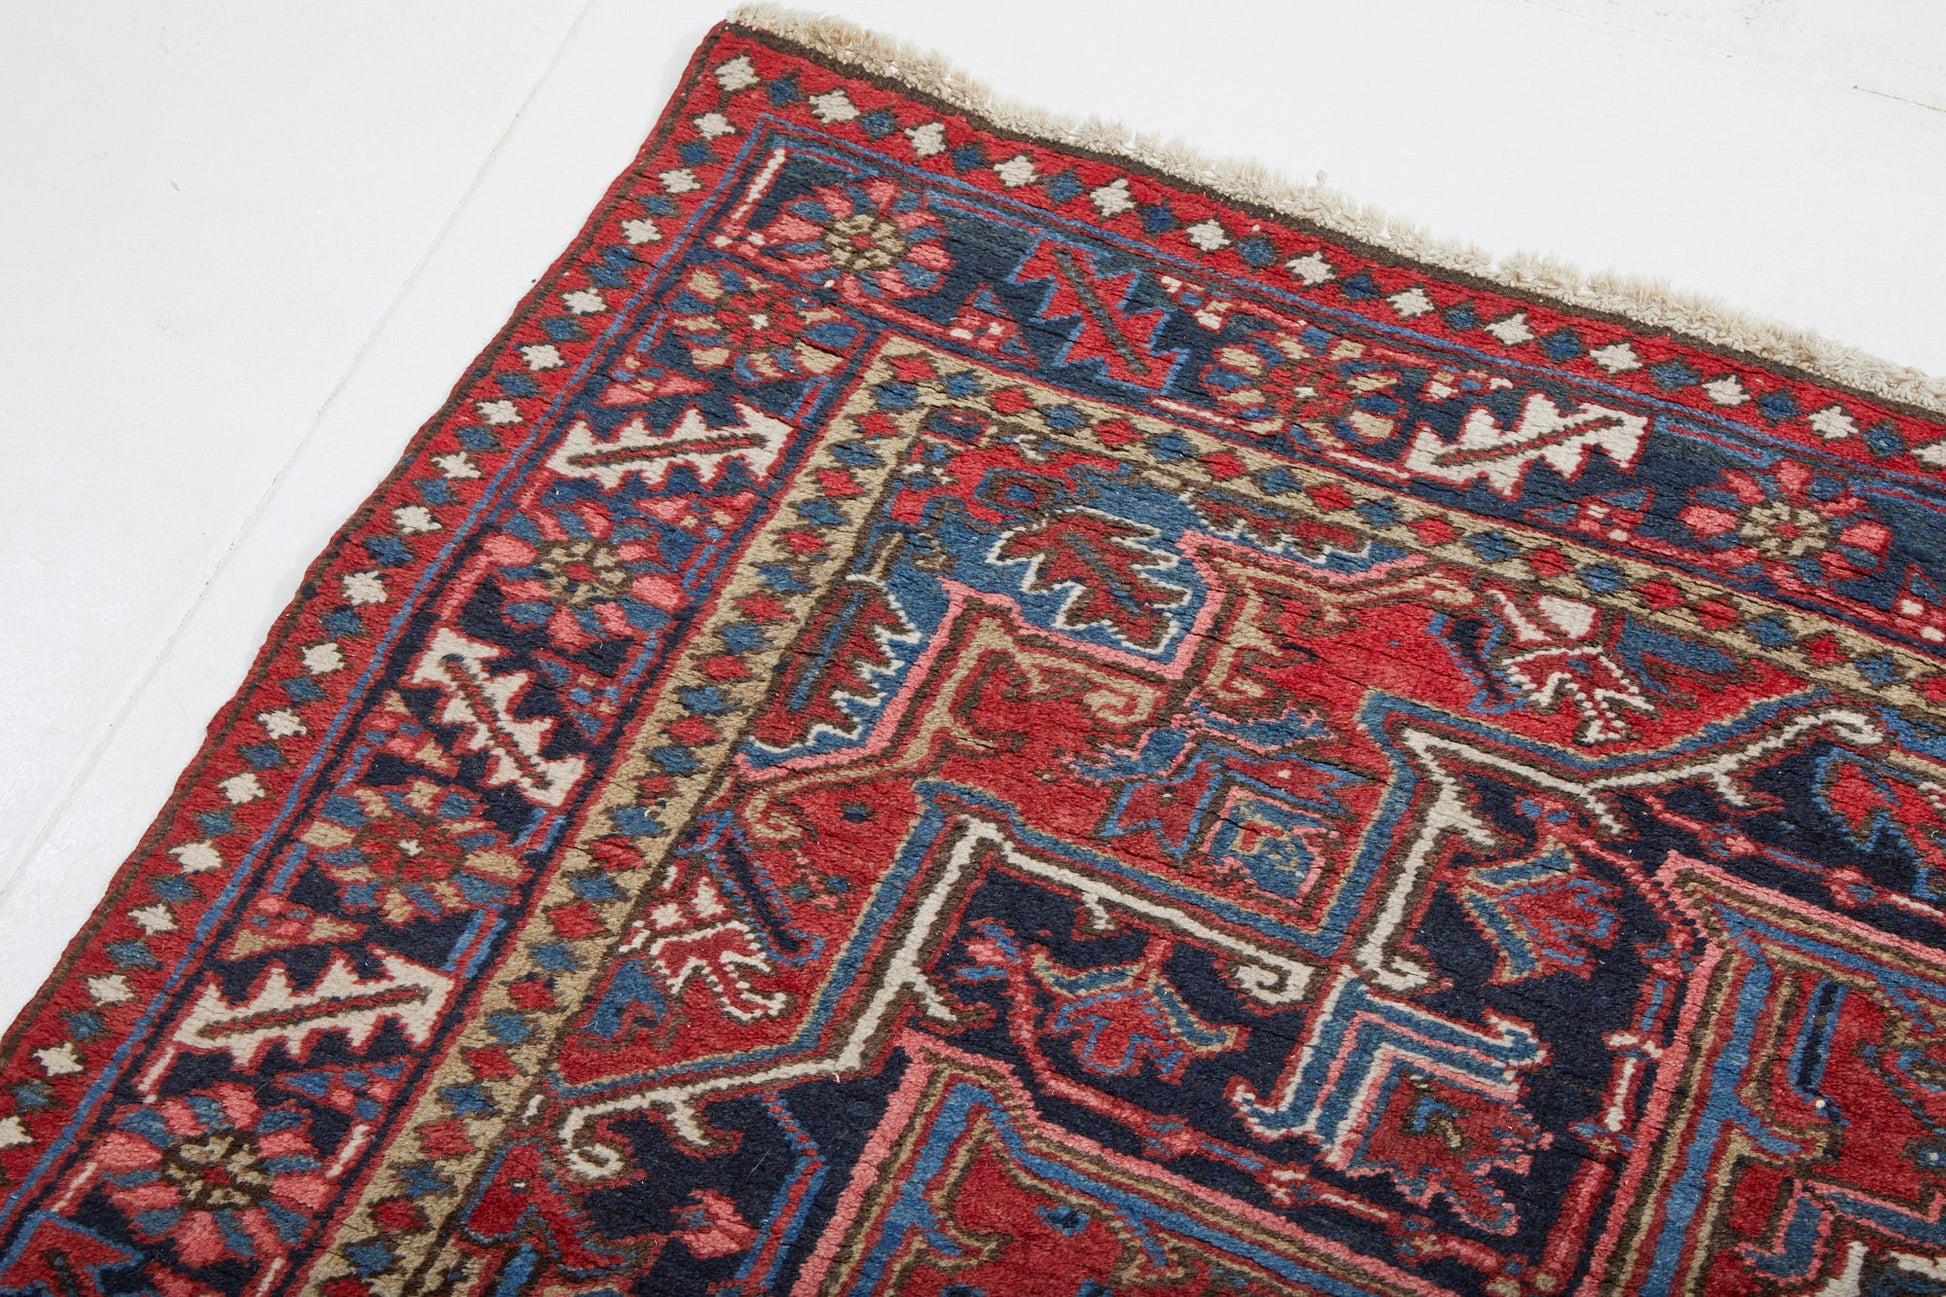 Red, Pink, Blue and White hand woven Heriz sampler Persian Rug - Available from King Kennedy Rugs Los Angeles